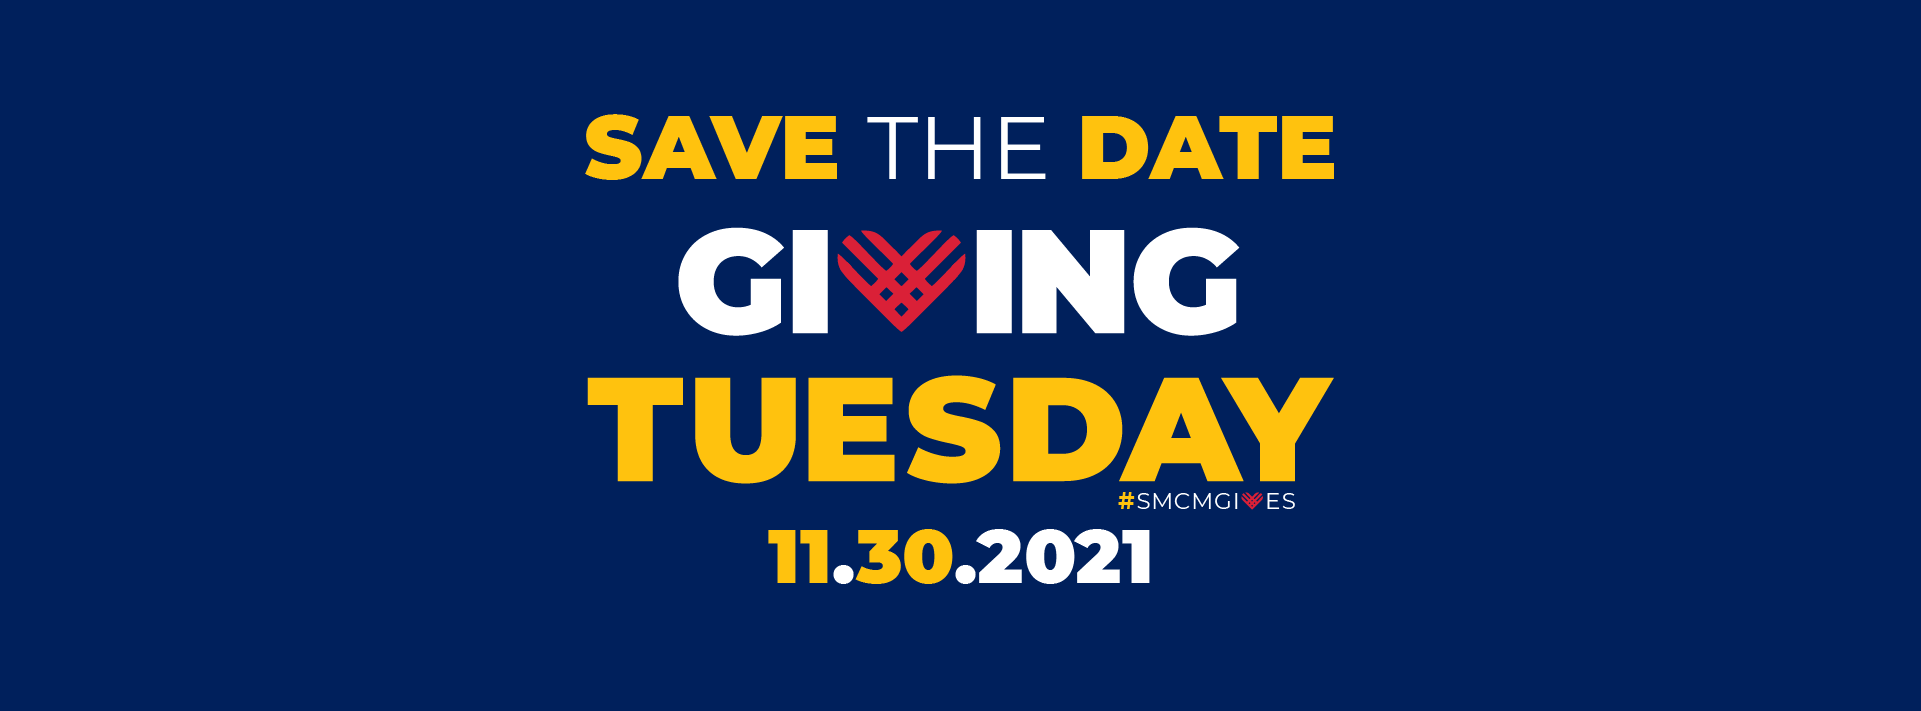 Save the Date, Giving Tuesday, #SMCMGives